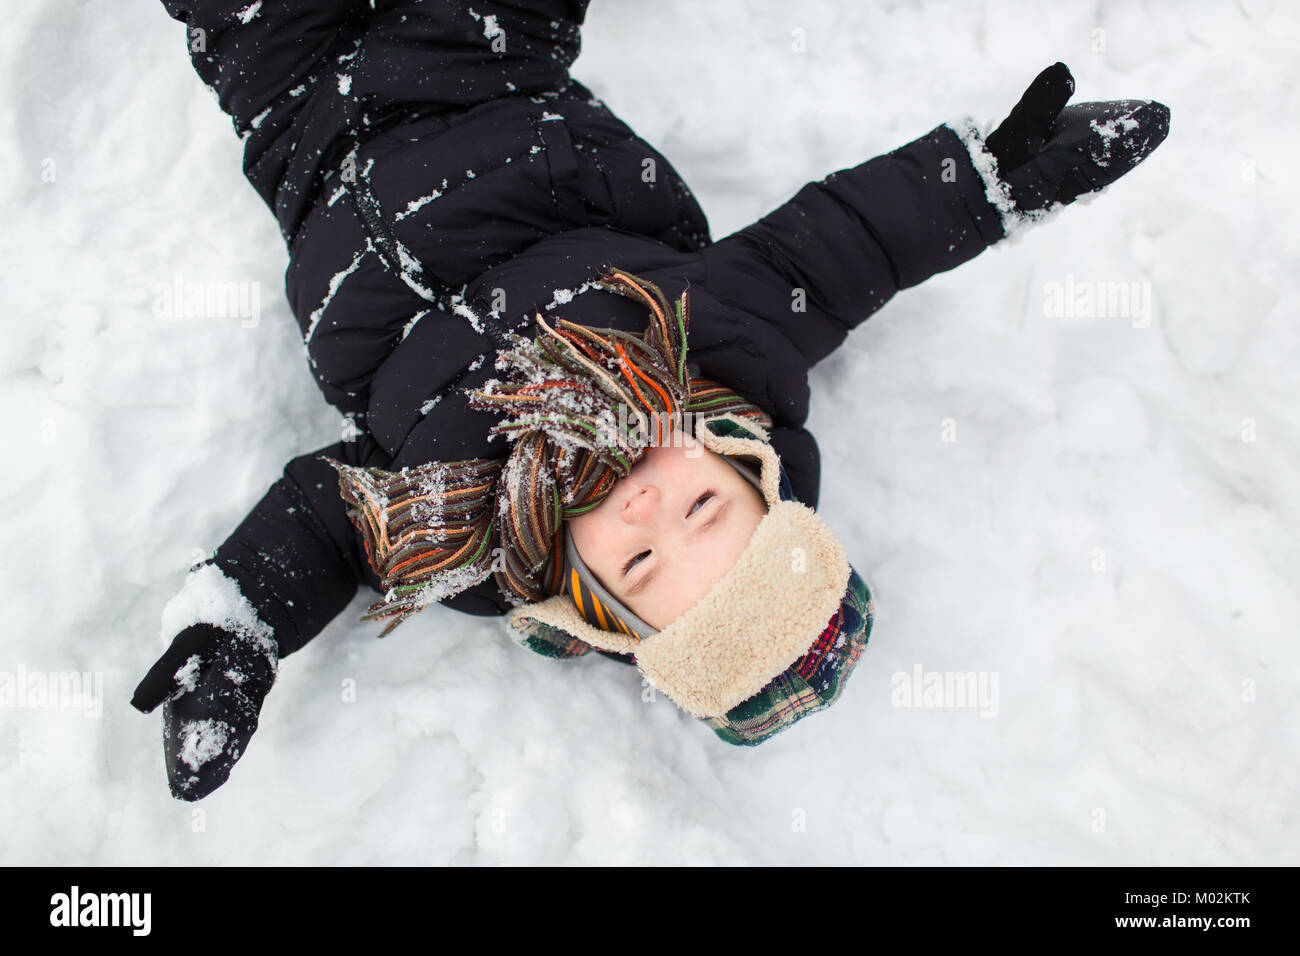 Top view of a little child dressed in warm clothes with his arms stretched wide in the snow. Boy making a snow angel. Stock Photo